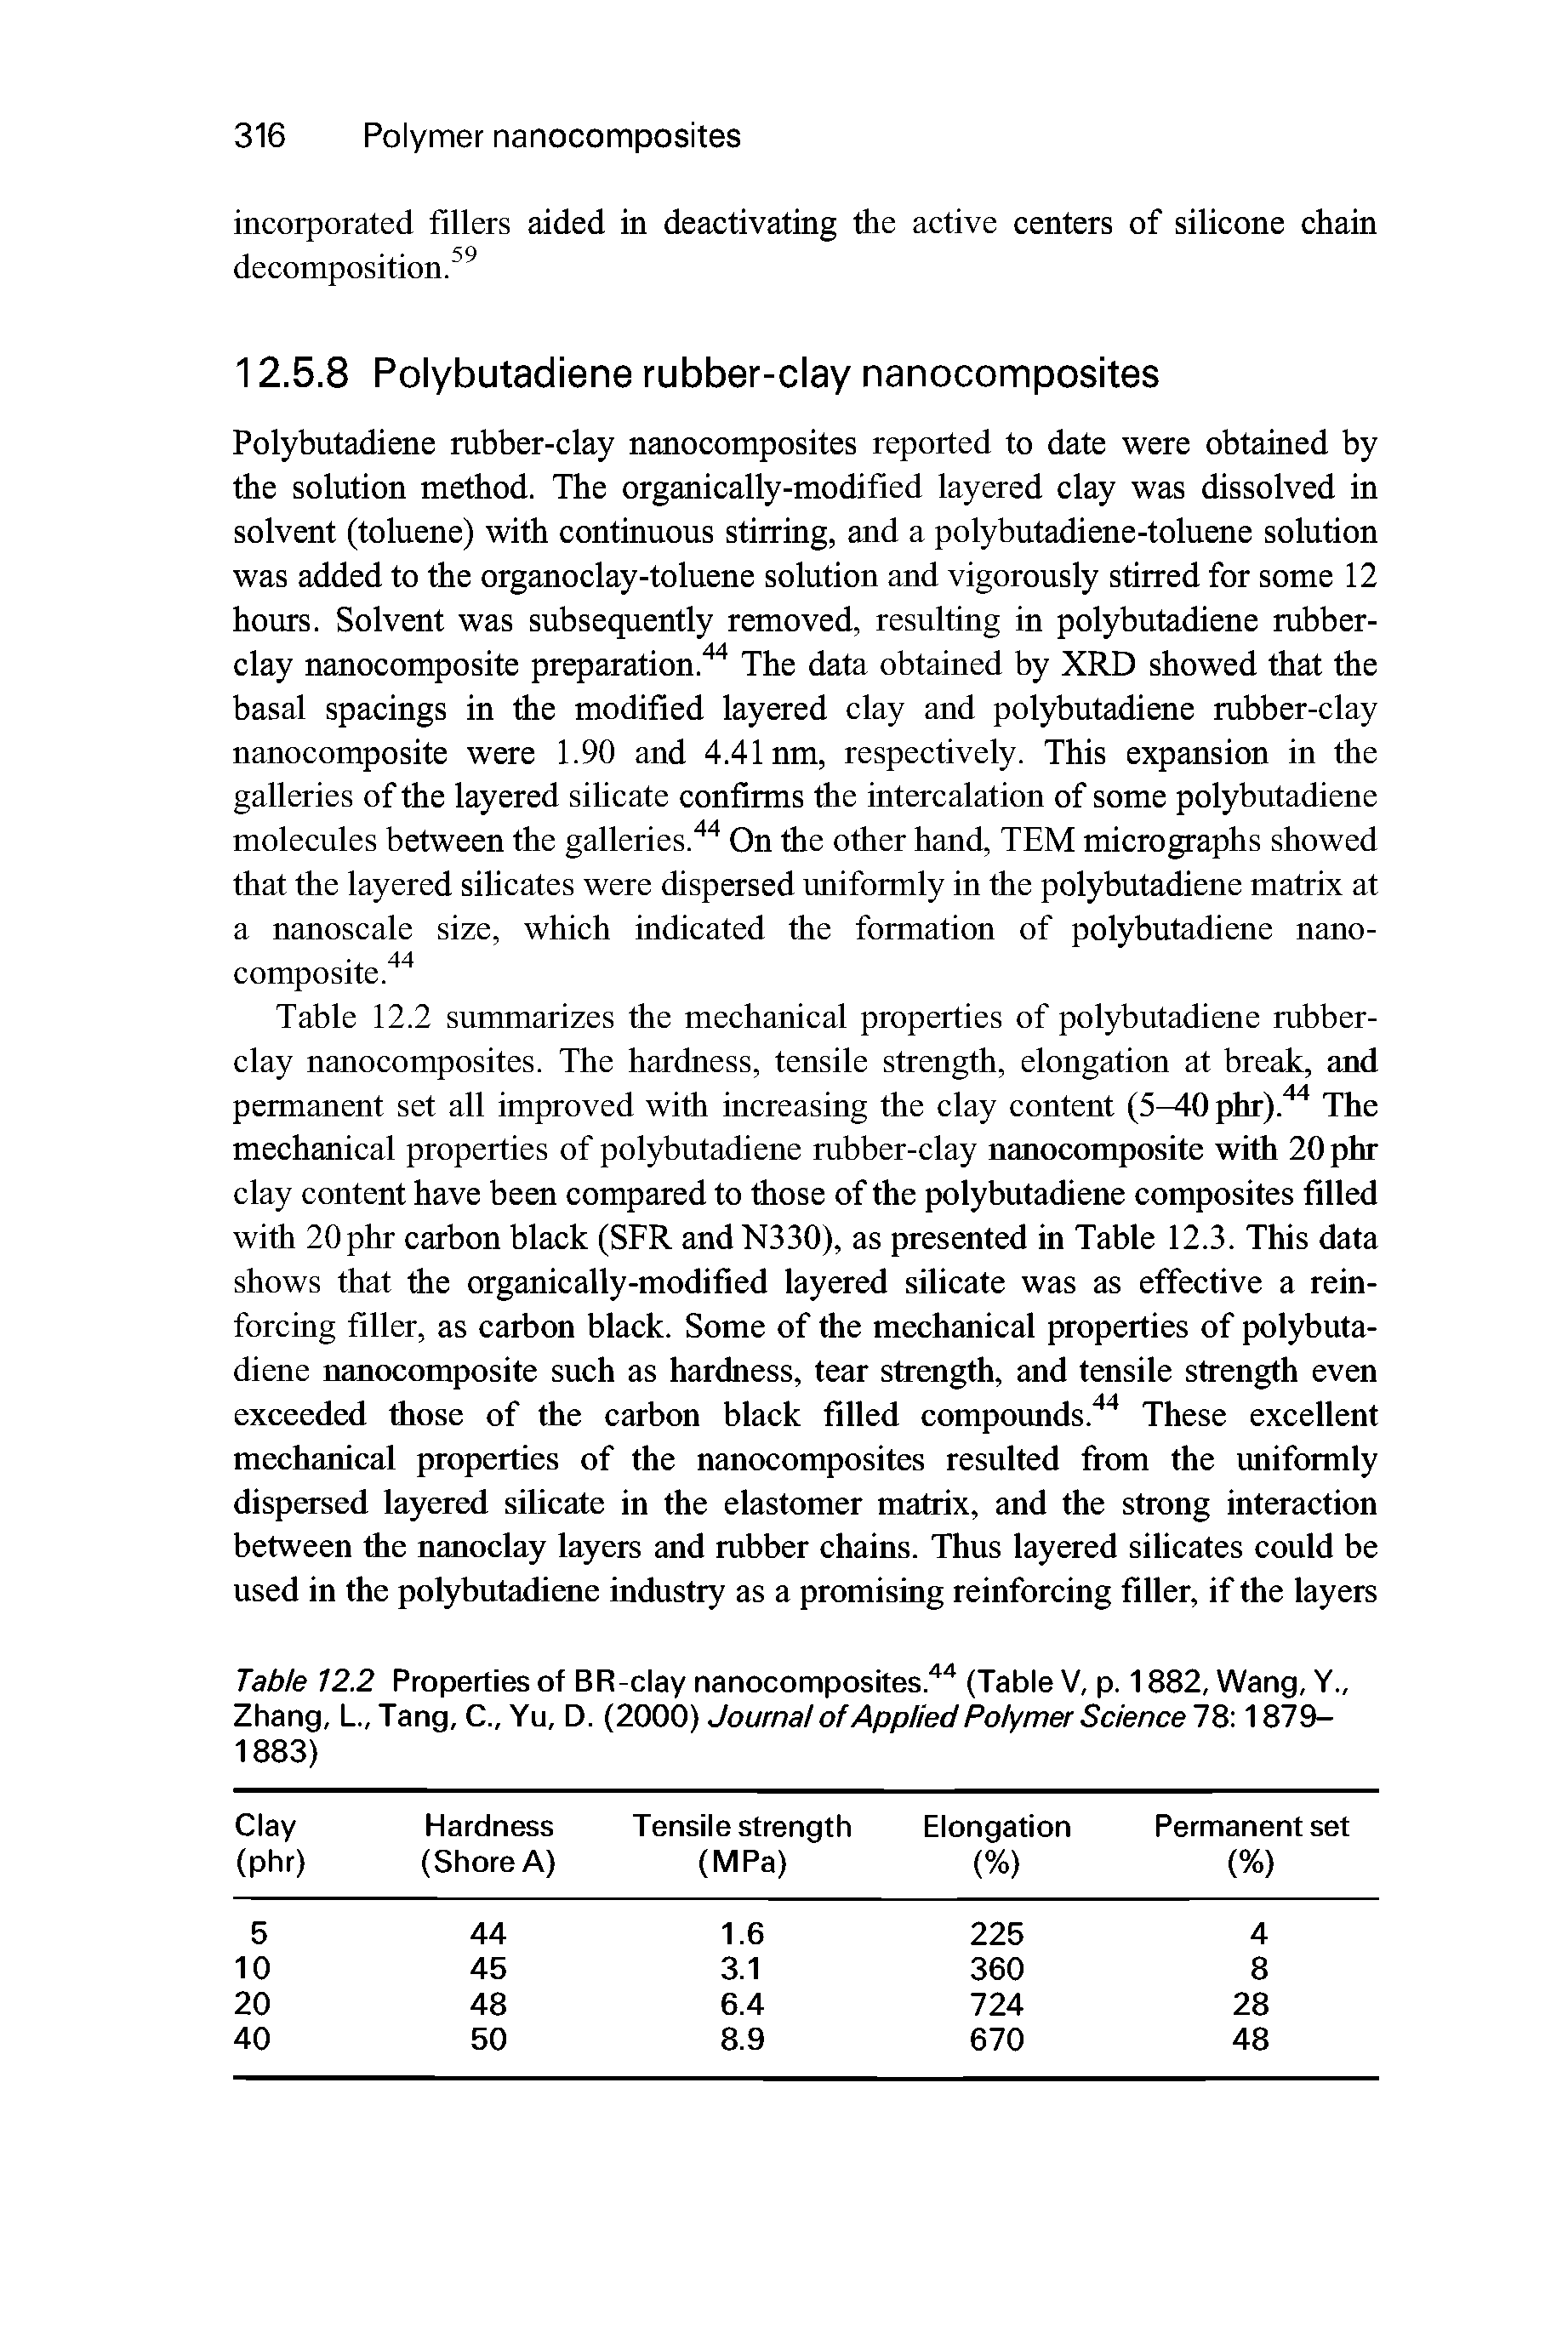 Table 12.2 summarizes the mechanical properties of polybutadiene rubber-clay nanocomposites. The hardness, tensile strength, elongation at break, and permanent set all improved with increasing the clay content (5—40 phr)." " The mechanical properties of polybutadiene rubber-clay nanocomposite with 20 pin-clay content have been compared to those of the polybutadiene composites filled with 20 phr carbon black (SFR and N330), as presented in Table 12.3. This data shows that the organically-modified layered silicate was as effective a reinforcing filler, as carbon black. Some of the mechanical properties of polybutadiene nanocomposite such as hardness, tear strength, and tensile strength even exceeded those of the carbon black filled compounds." " These excellent mechanical properties of the nanocomposites resulted from the uniformly dispersed layered silicate in the elastomer matrix, and the strong interaction between the nanoclay layers and rubber chains. Thus layered silicates could be used in the polybutadiene industry as a promising reinforcing filler, if the layers...